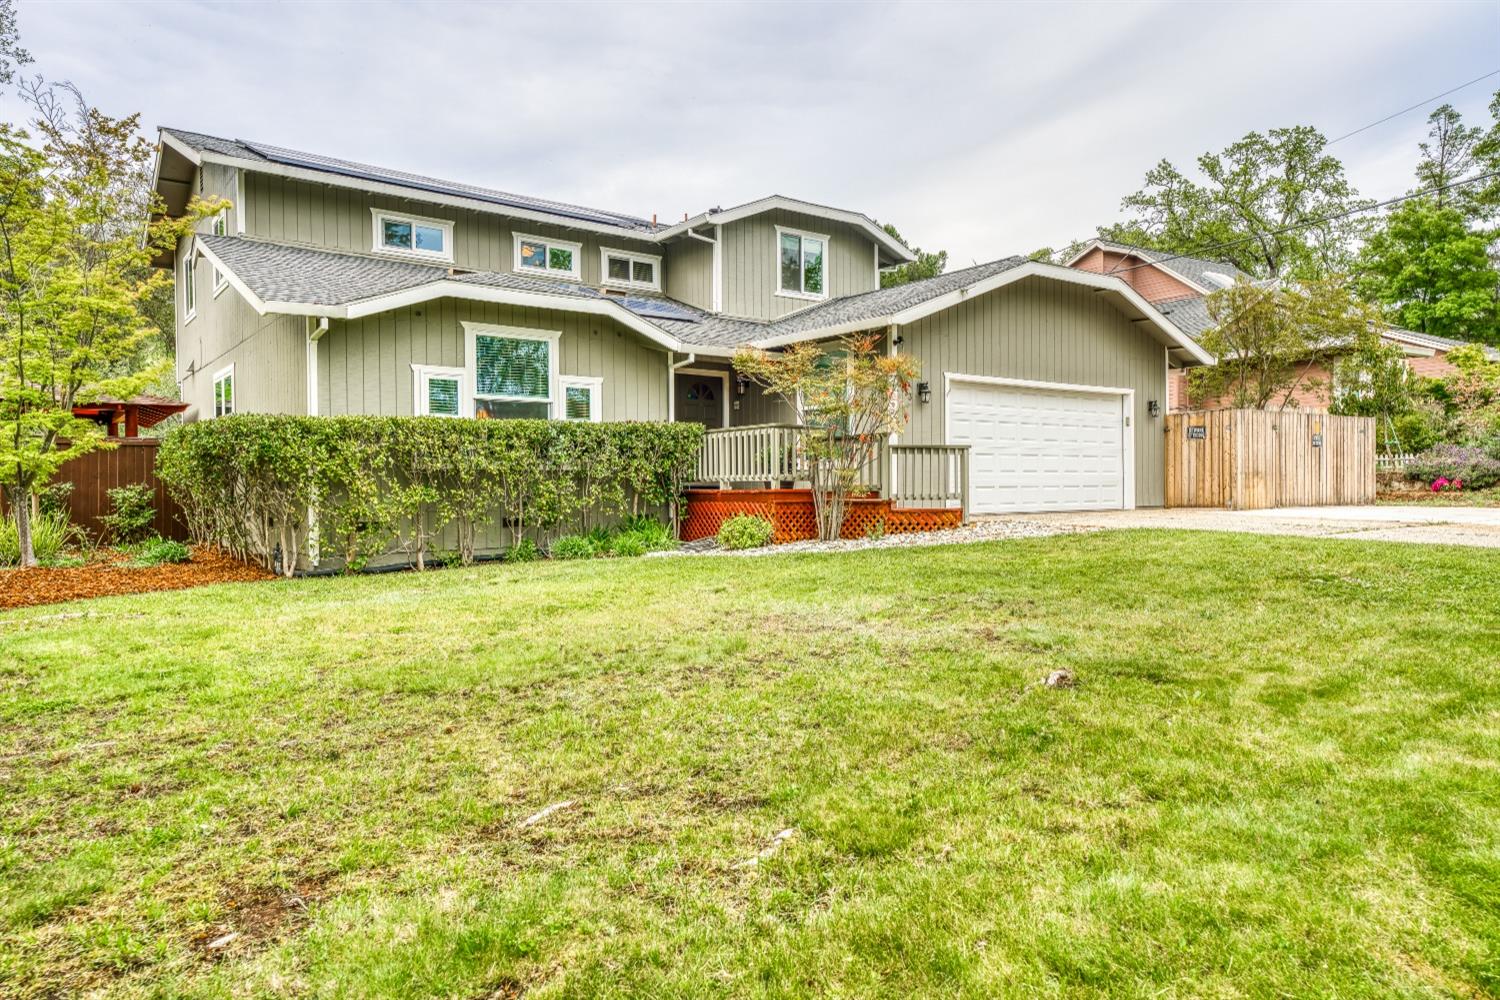 Photo of 2653 Knollwood Dr in Cameron Park, CA